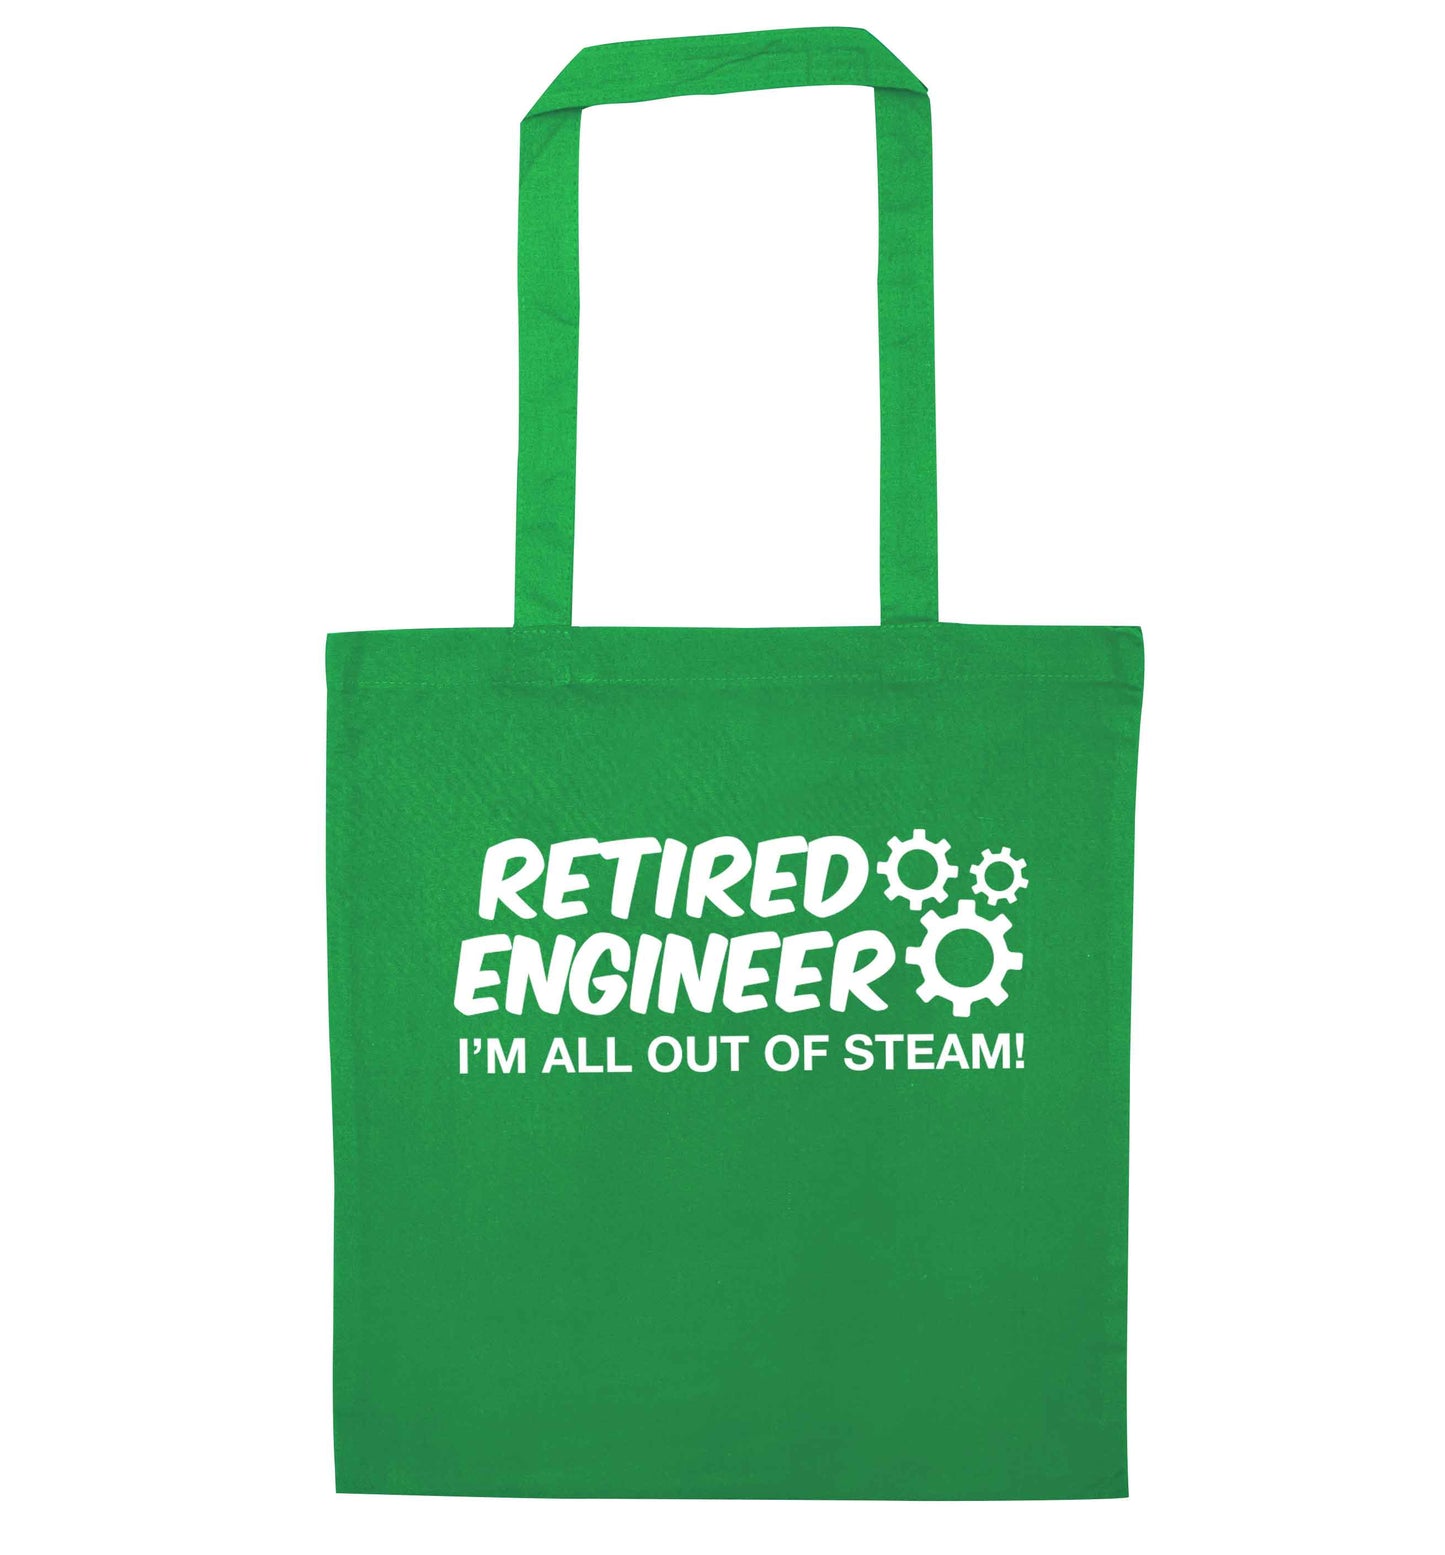 Retired engineer I'm all out of steam green tote bag